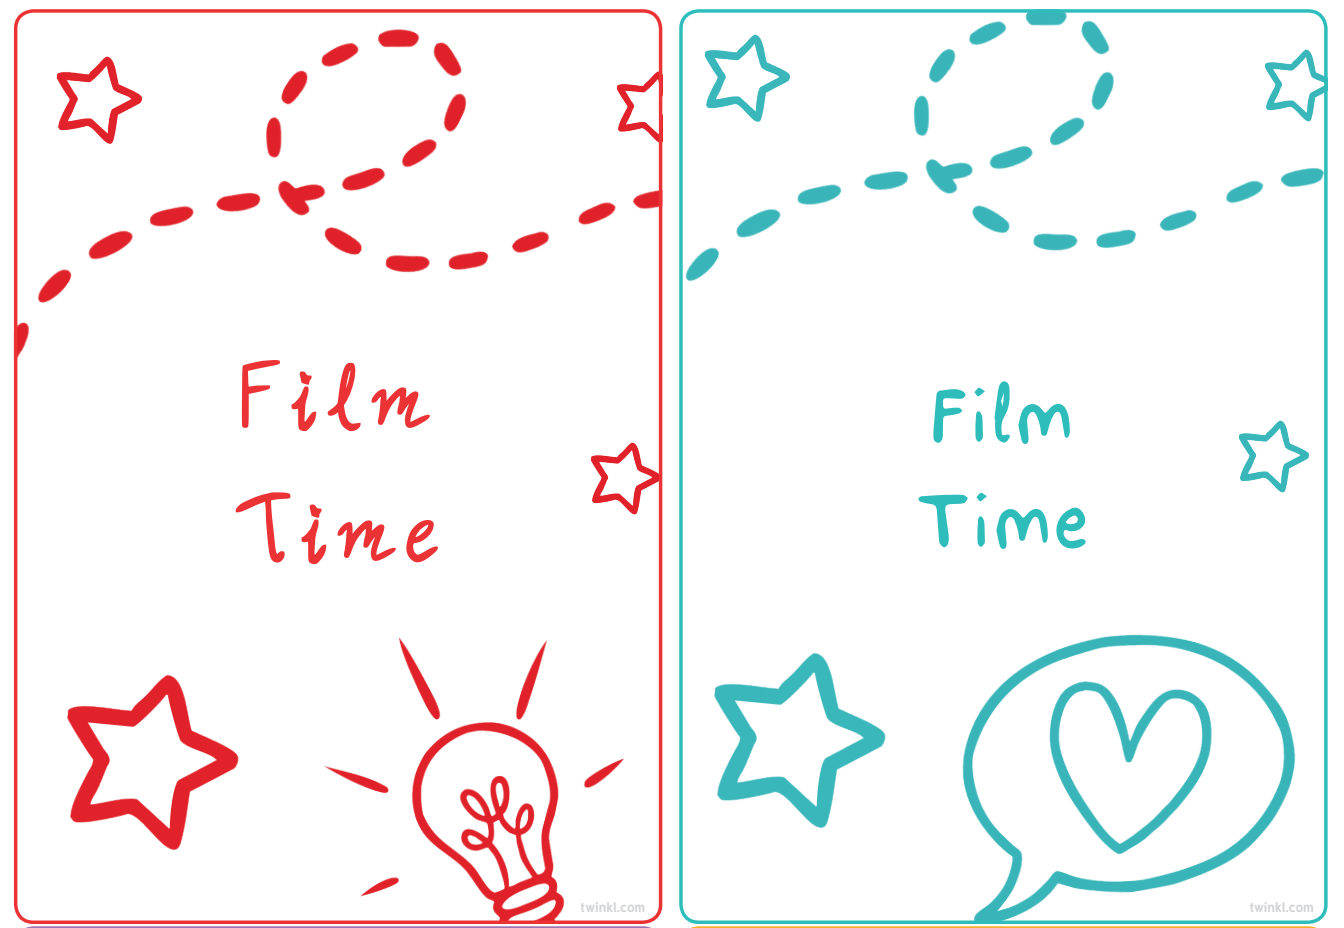 What is Film Education? - Answered - Twinkl teaching Wiki